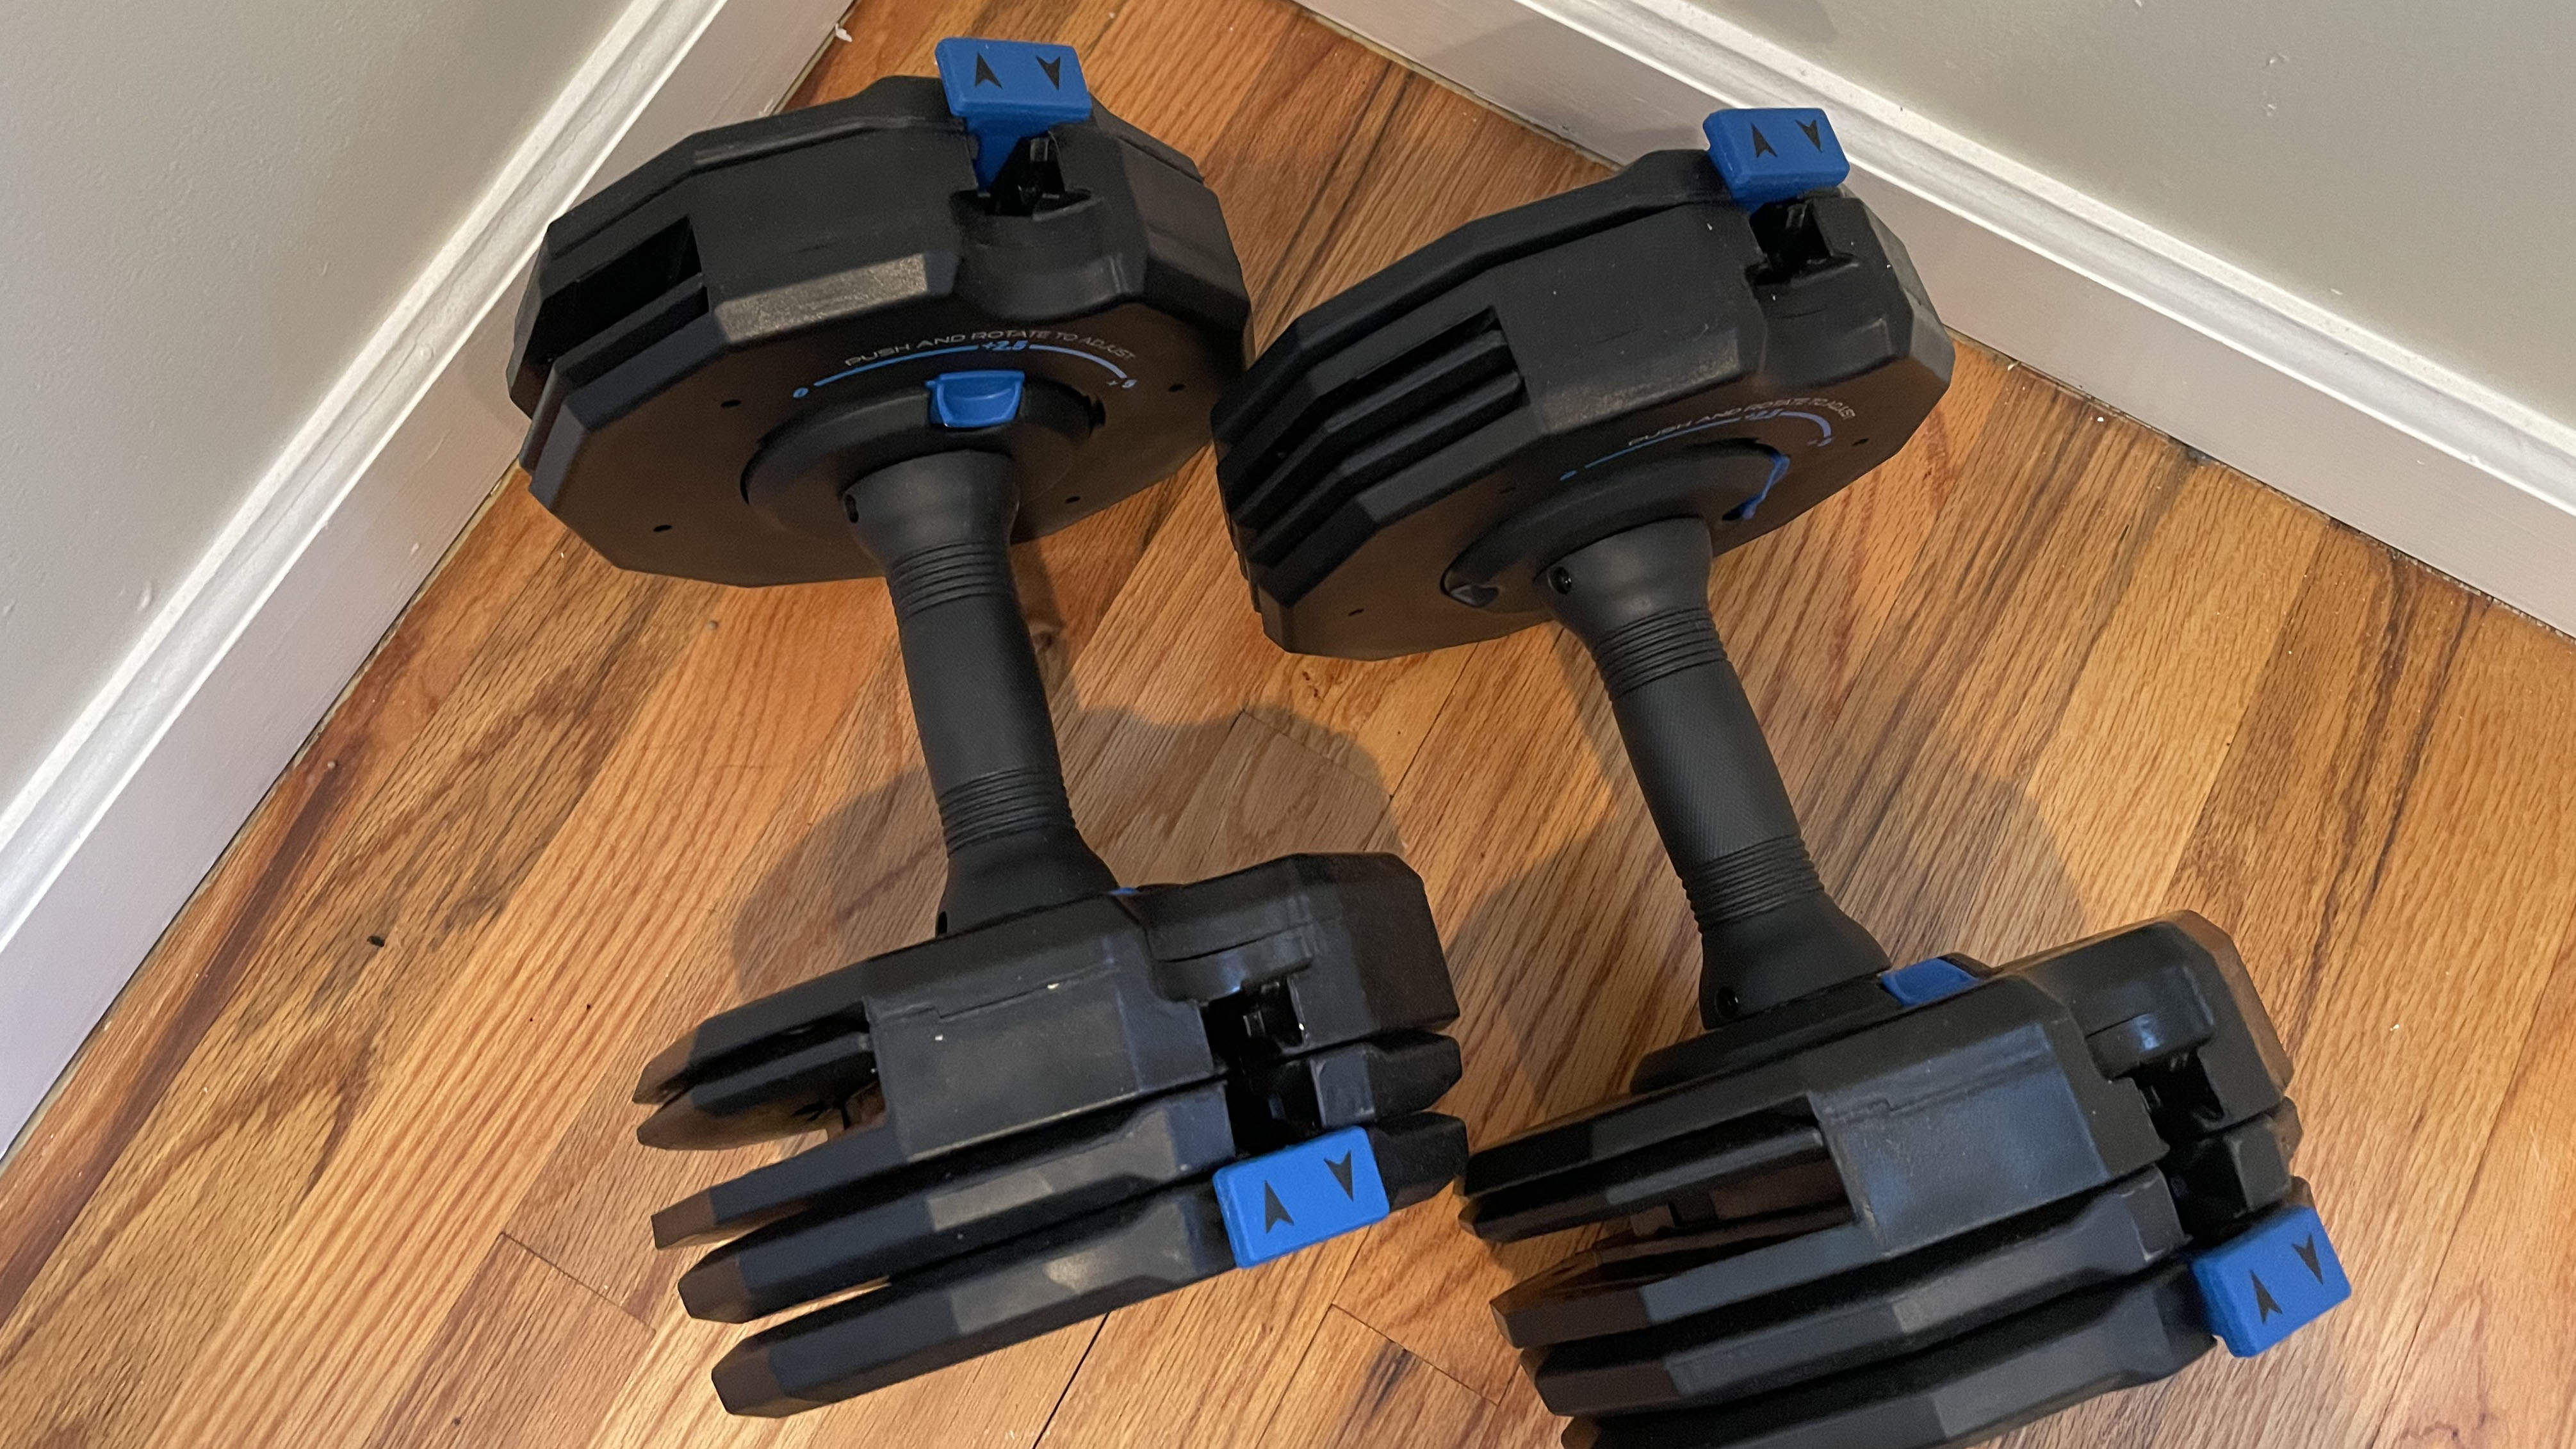 NordicTrack Select-A-Weight dumbbells 50lb